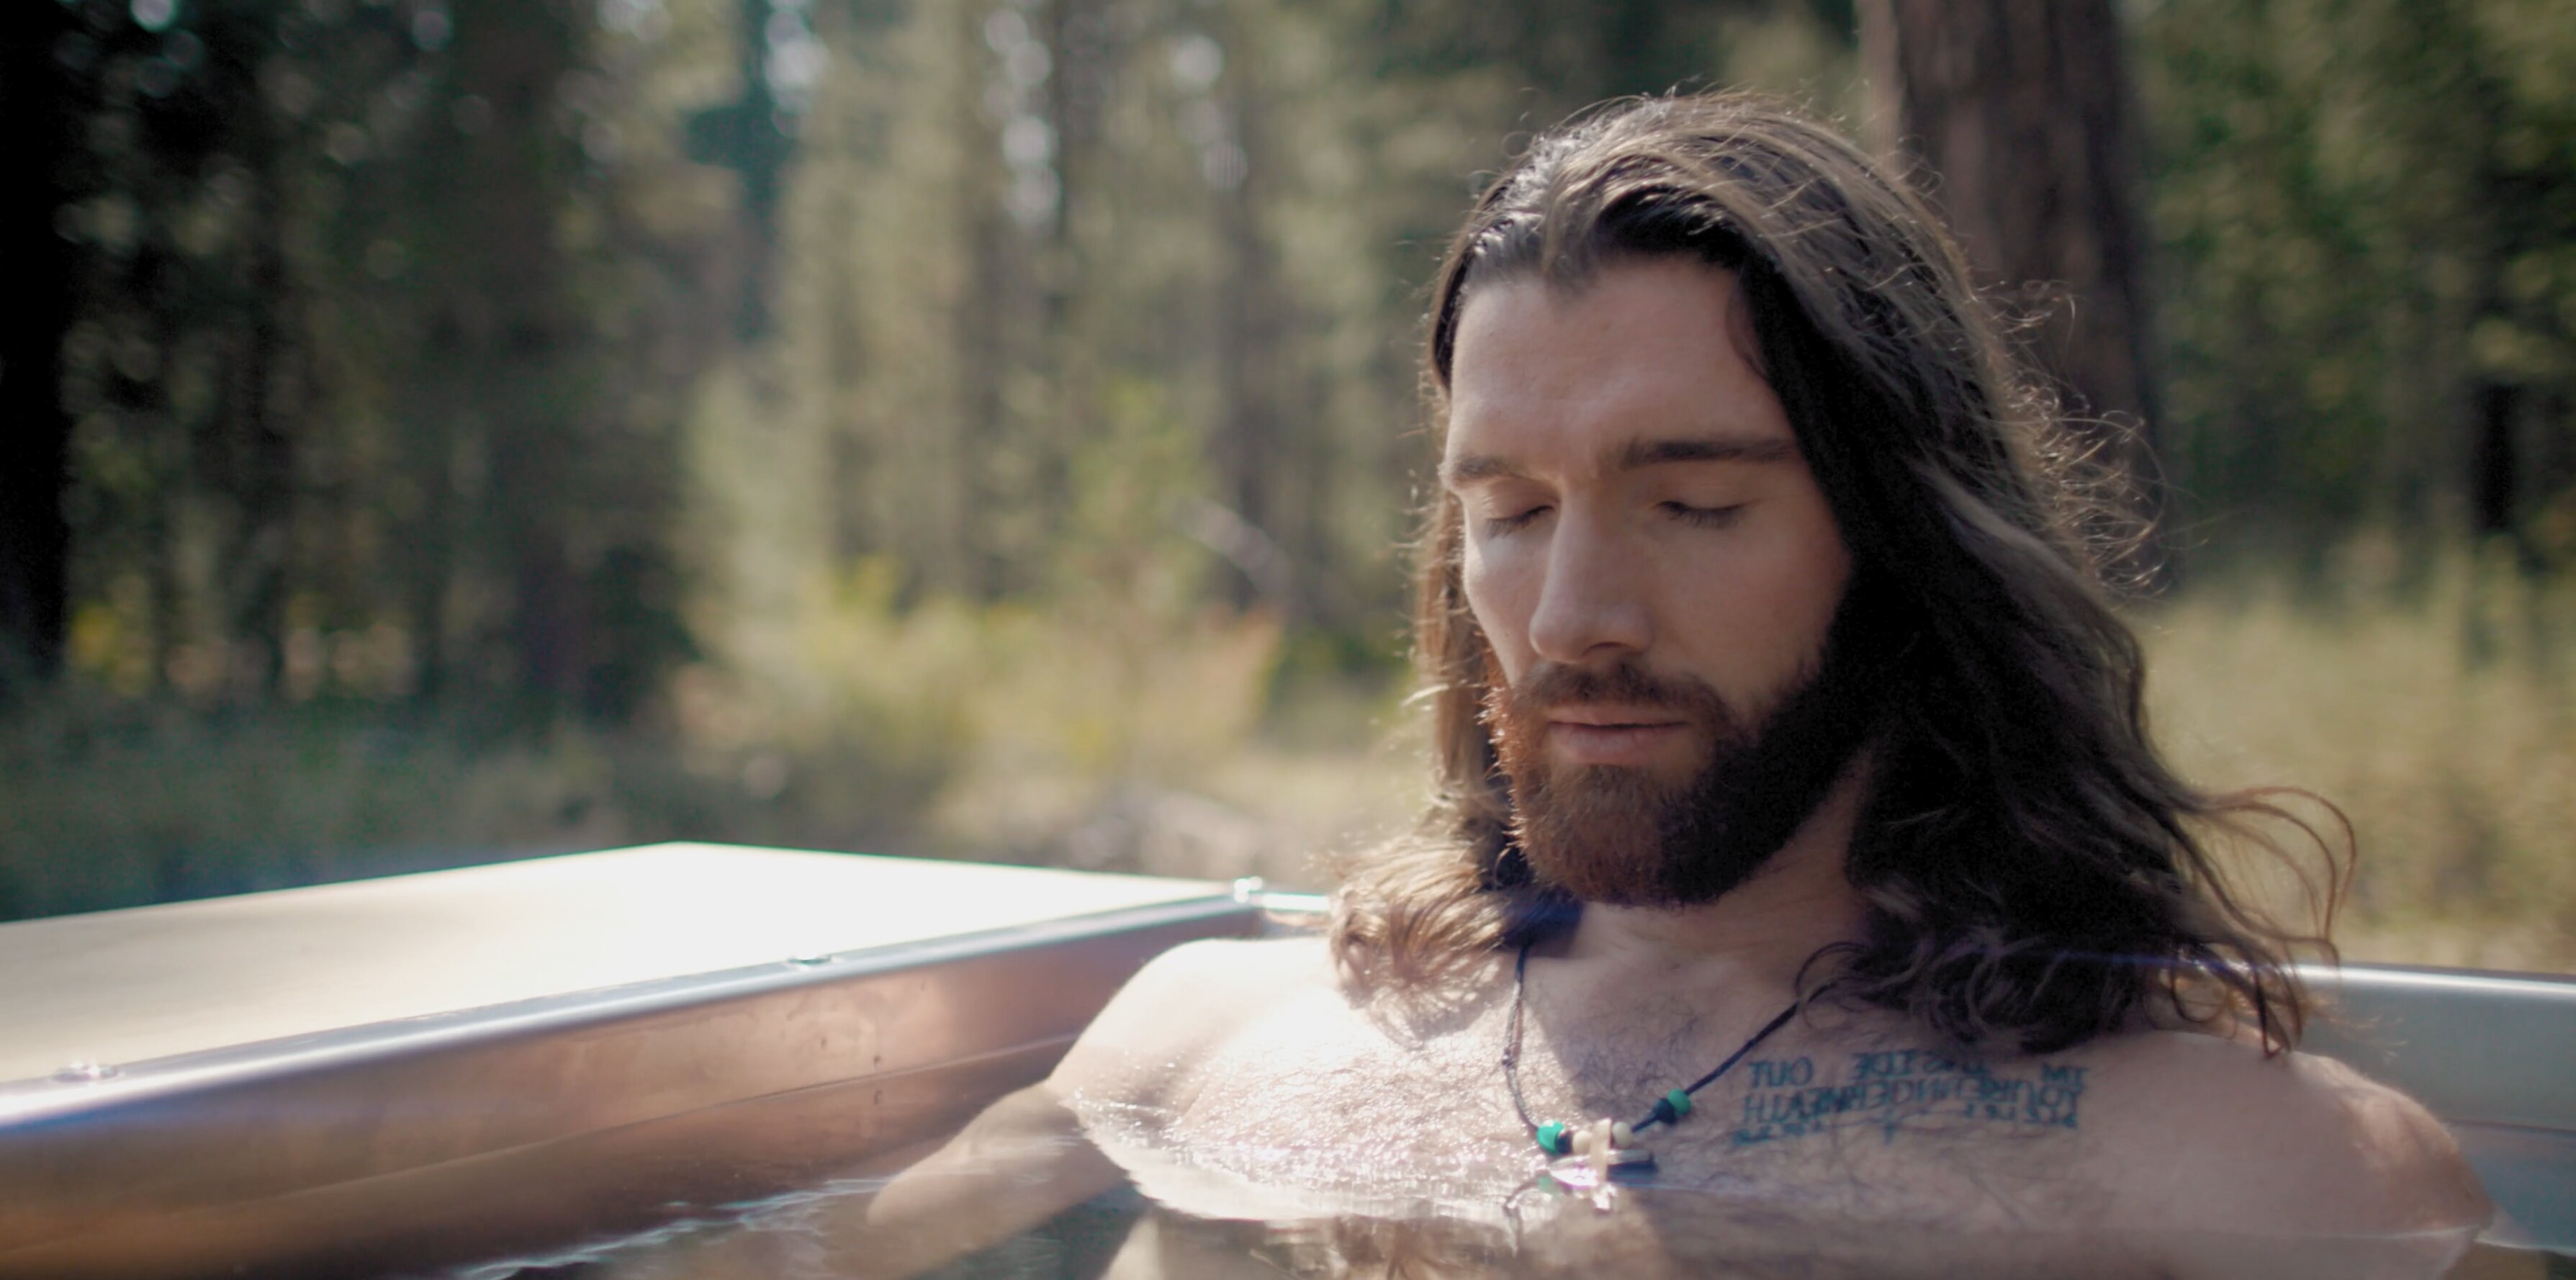 a man with long hair and beard in a hot tub